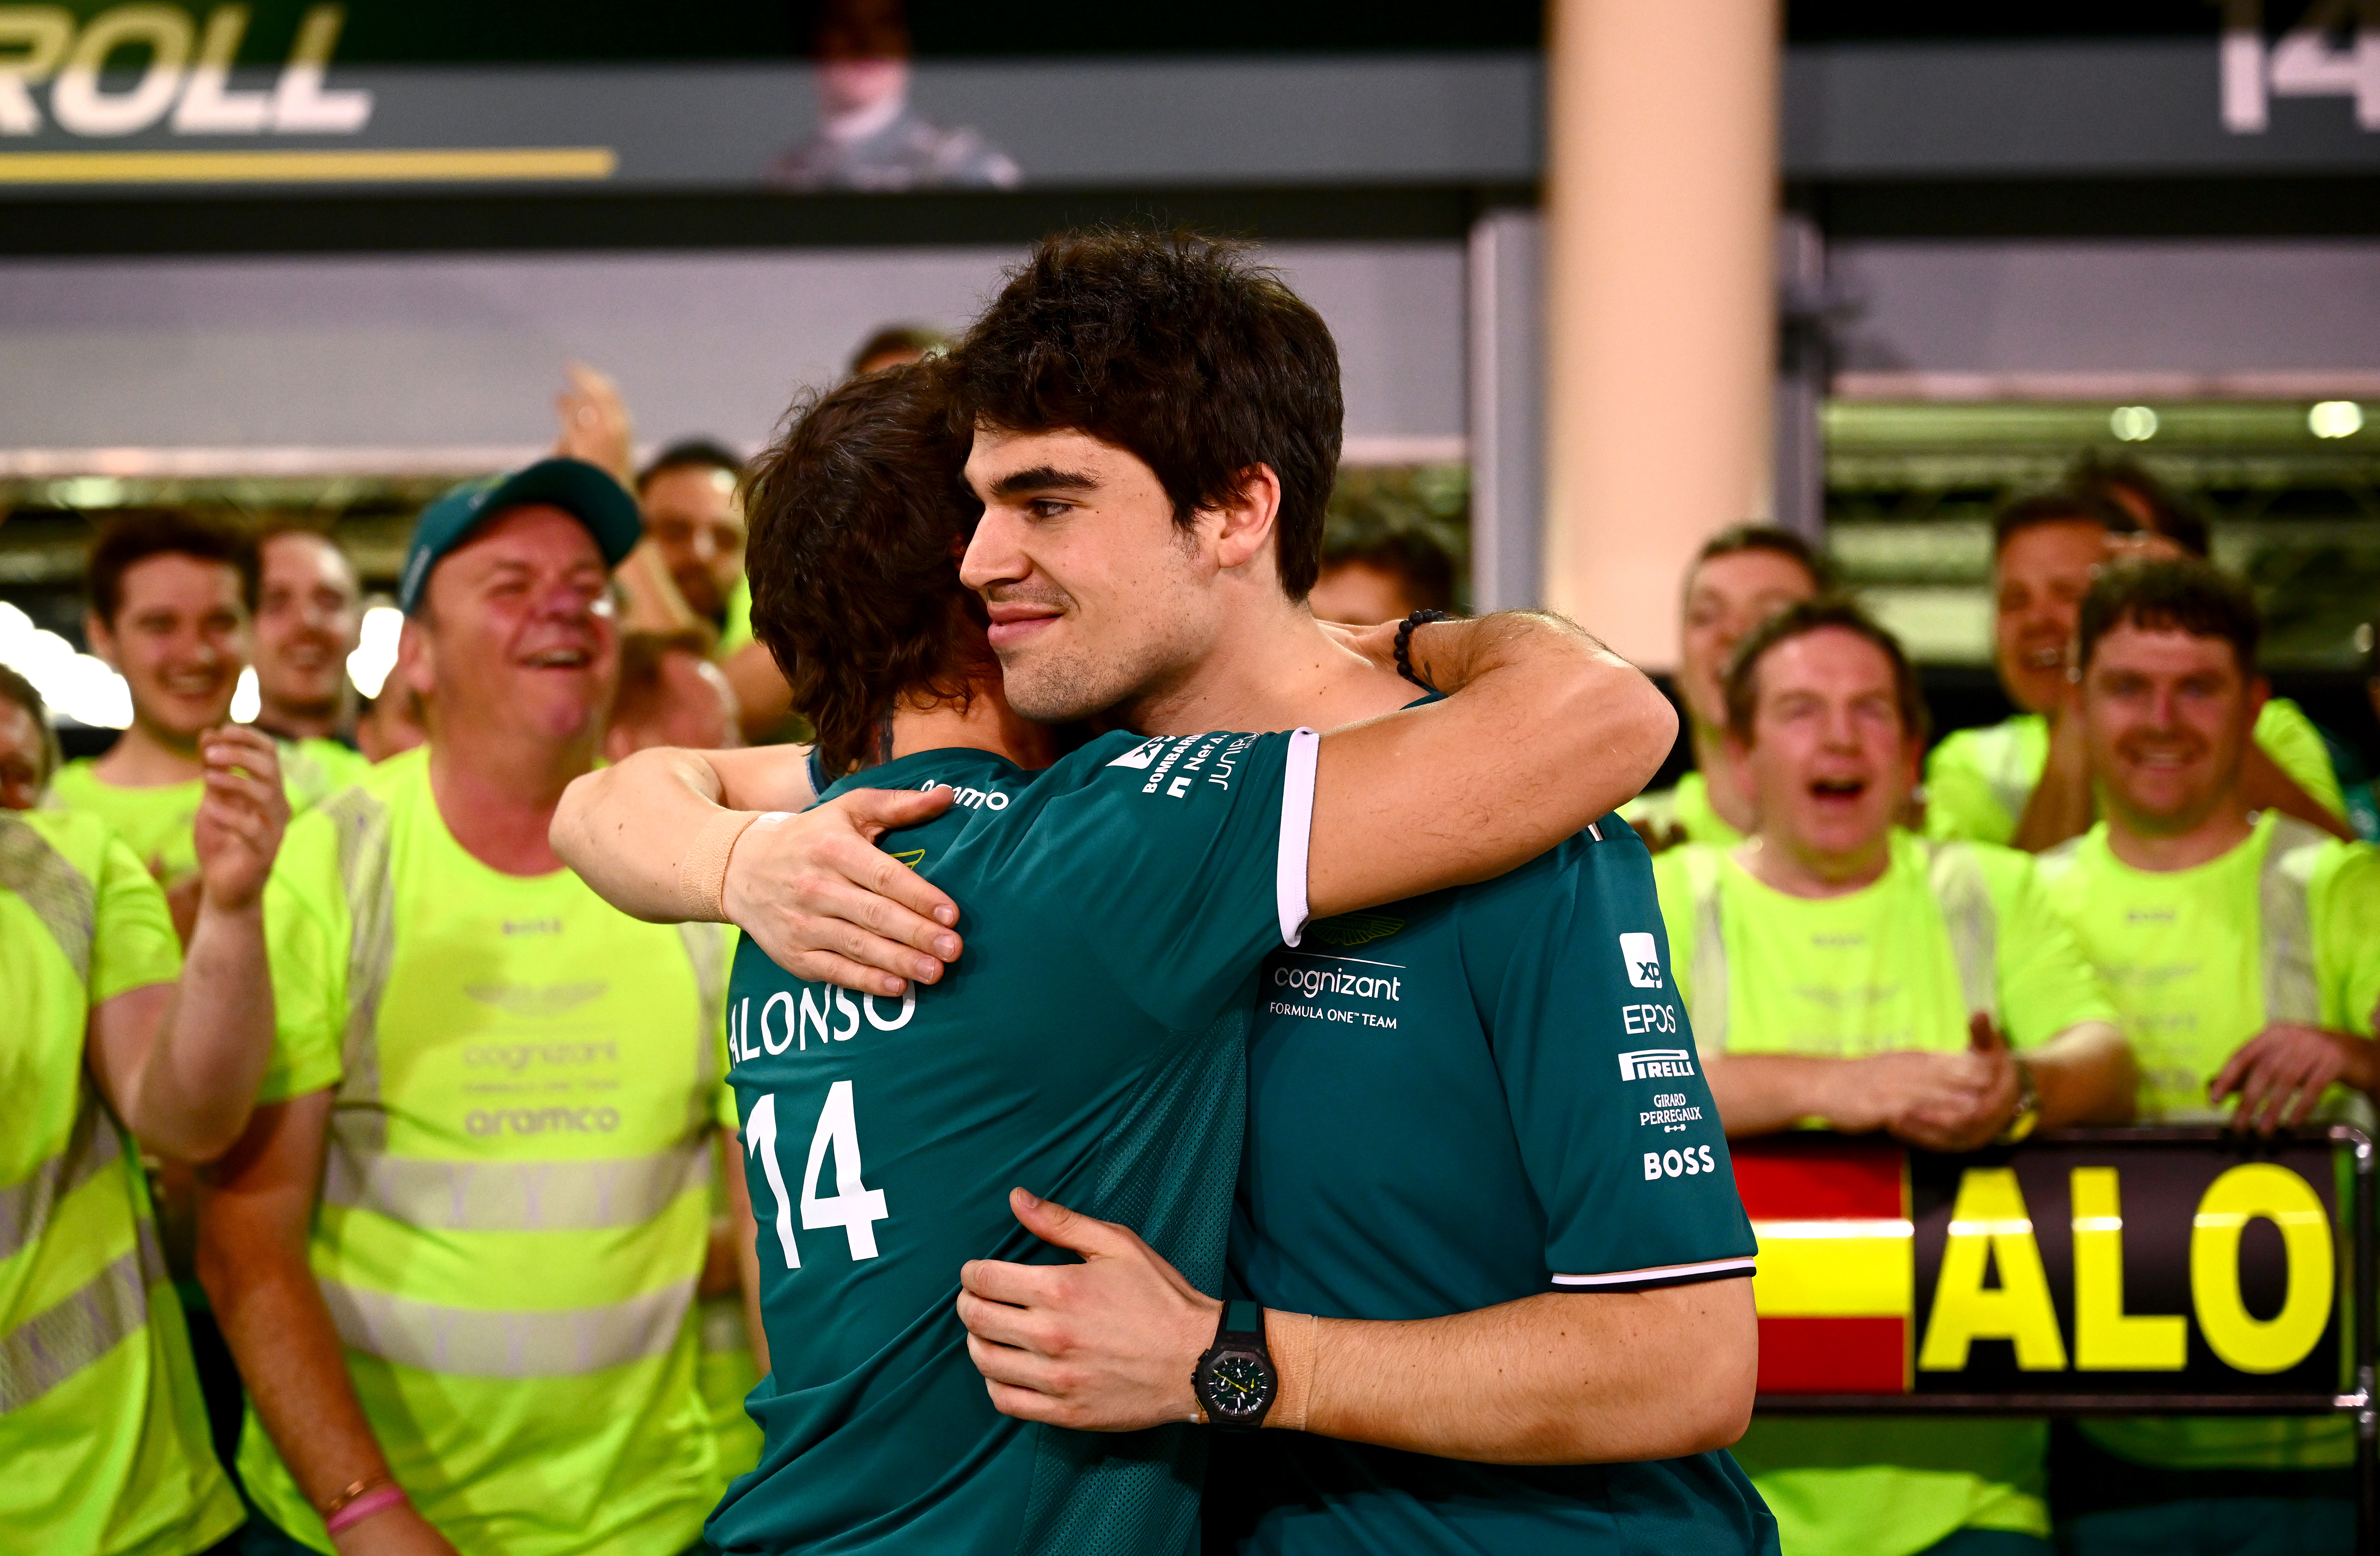 Stroll and Alonso embrace at the end of the Bahrain Grand Prix.